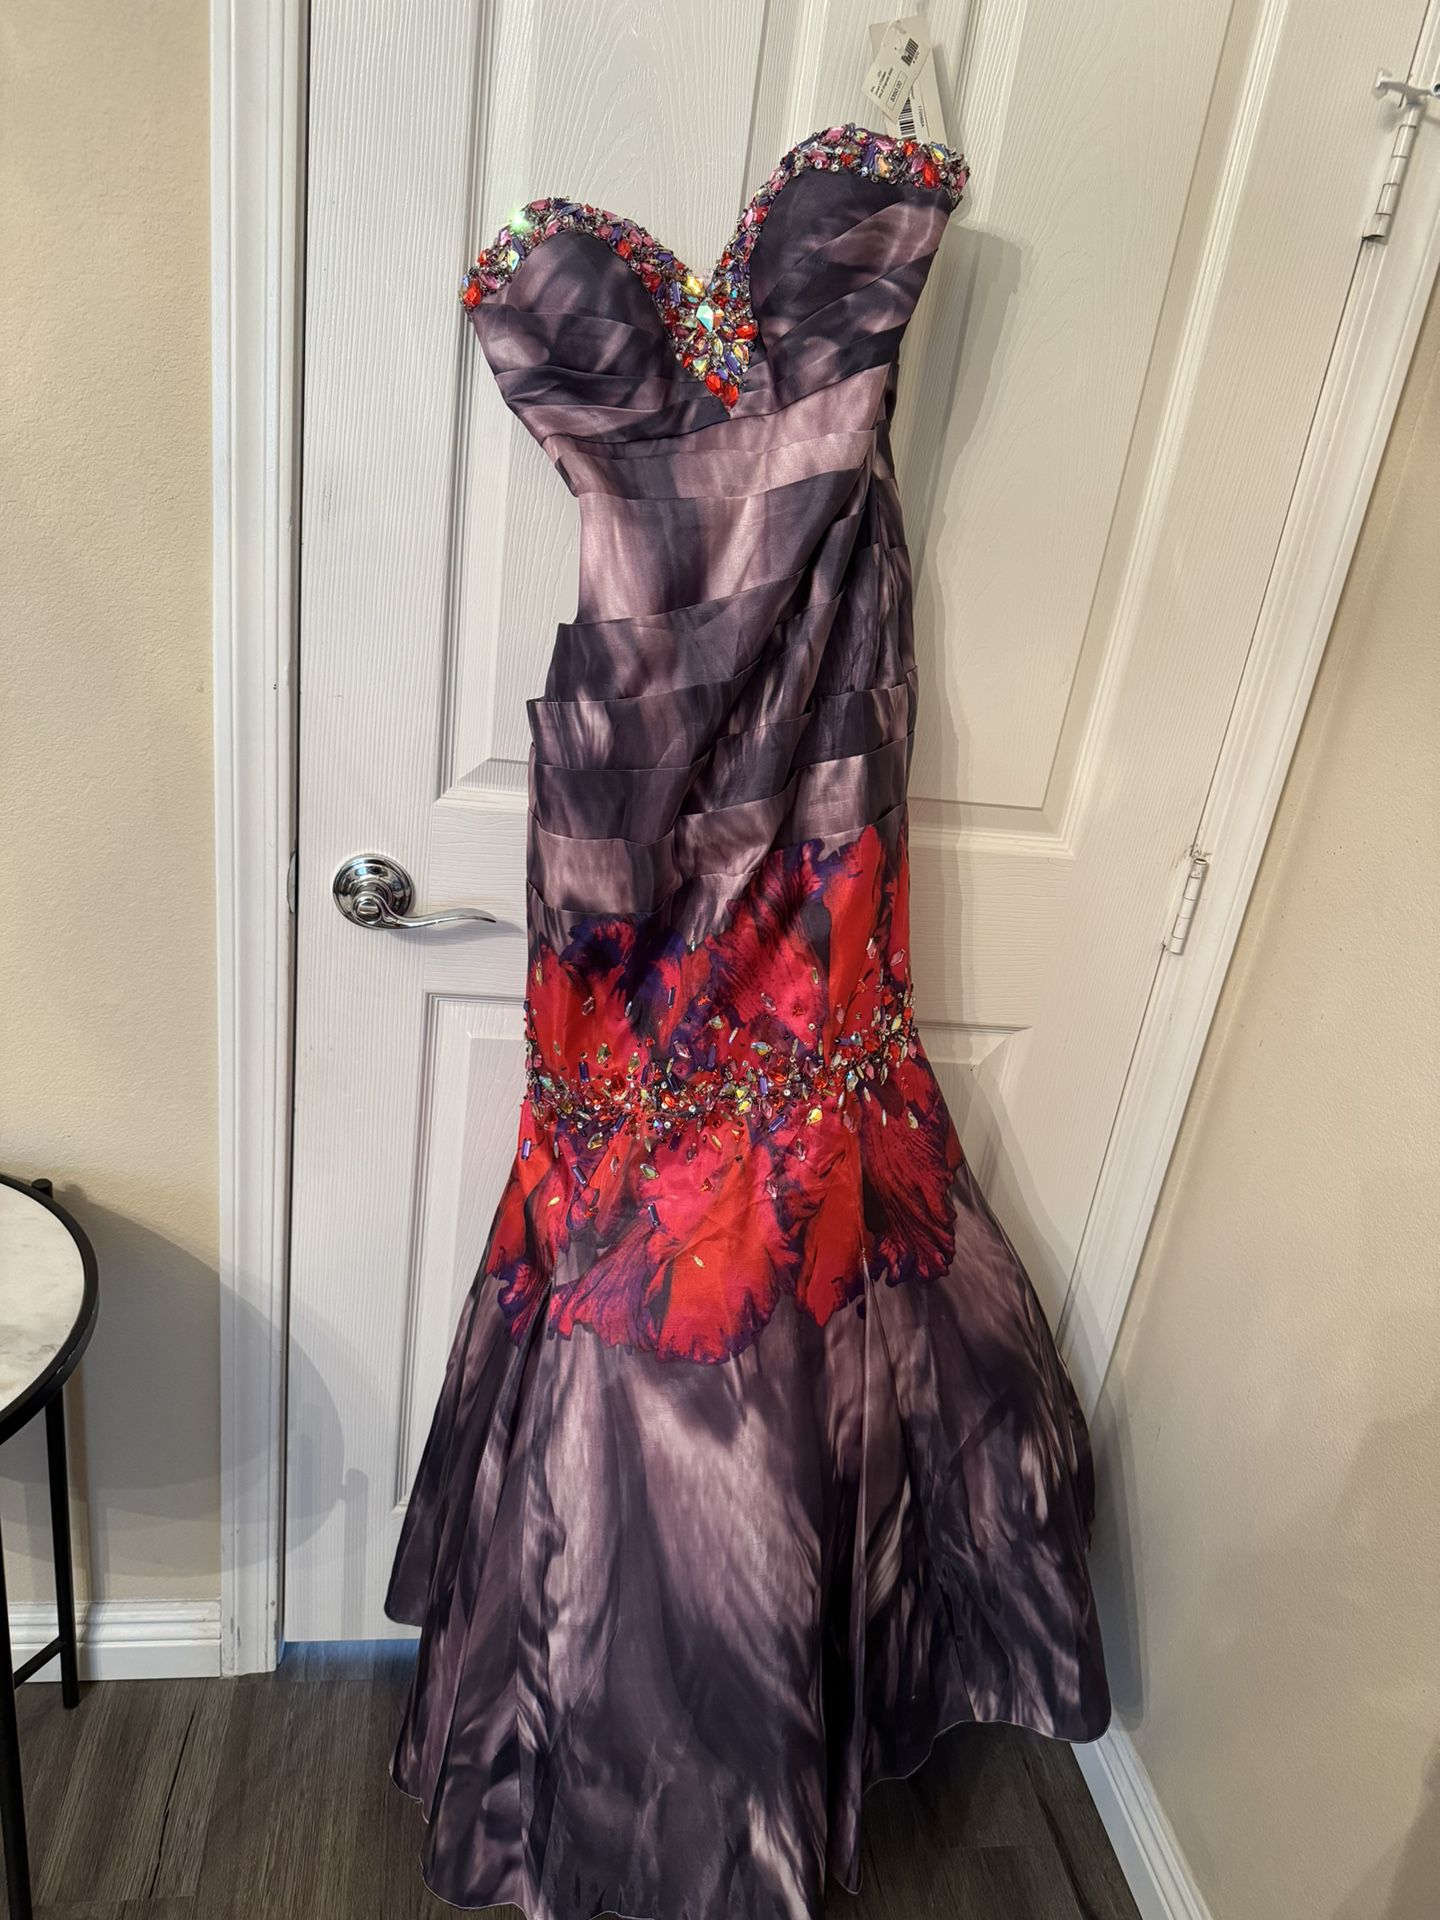 Jovani Purple And Pink Floral Evening Gown $50 Years of Life Lessons Tip #